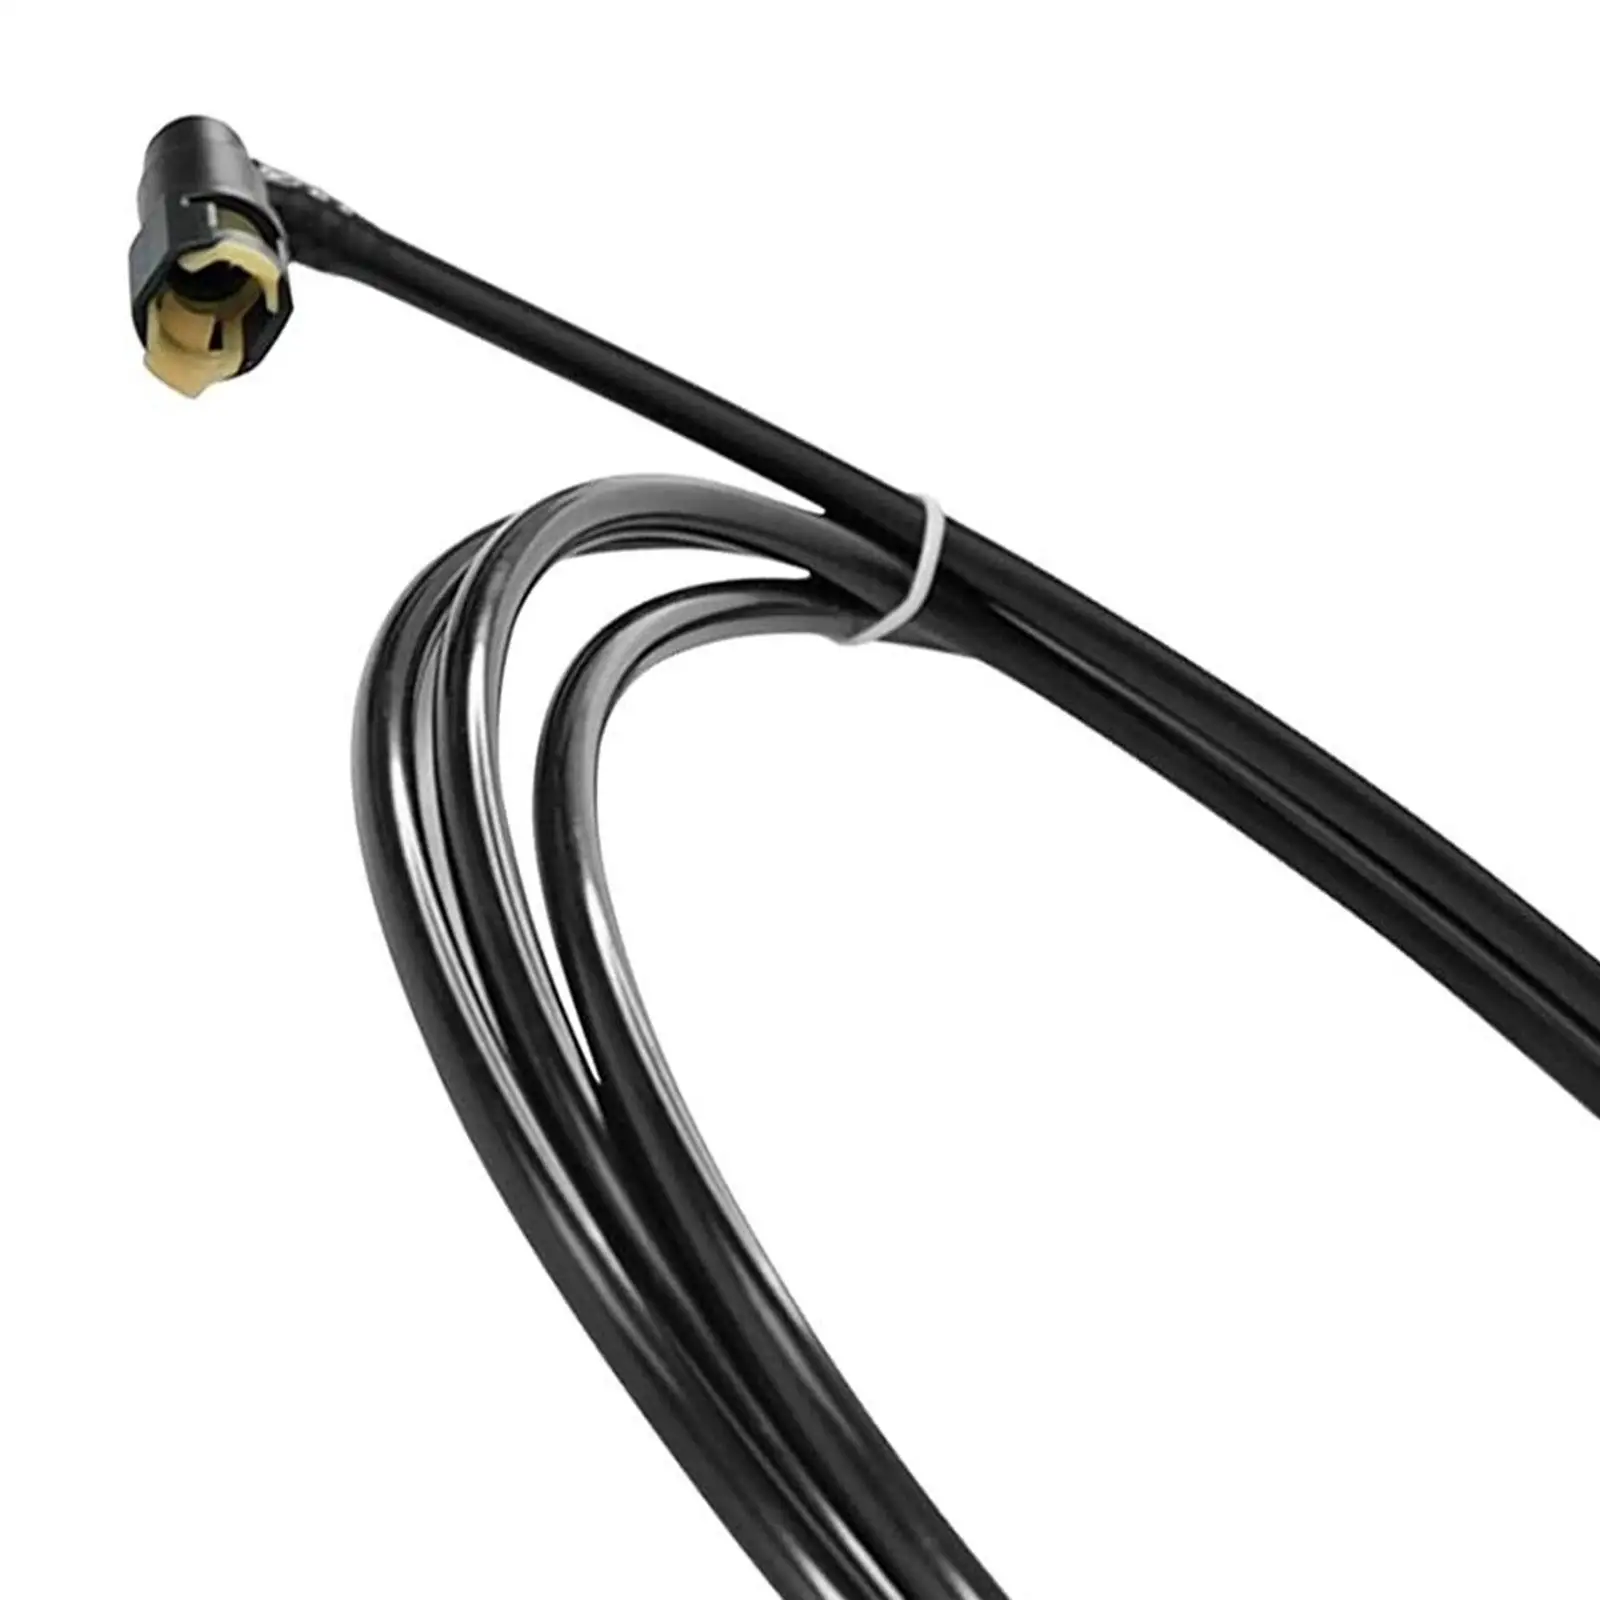 Gas Fuel Line Fl-Fg0212 High Performance Car Accessories Replaces Durable